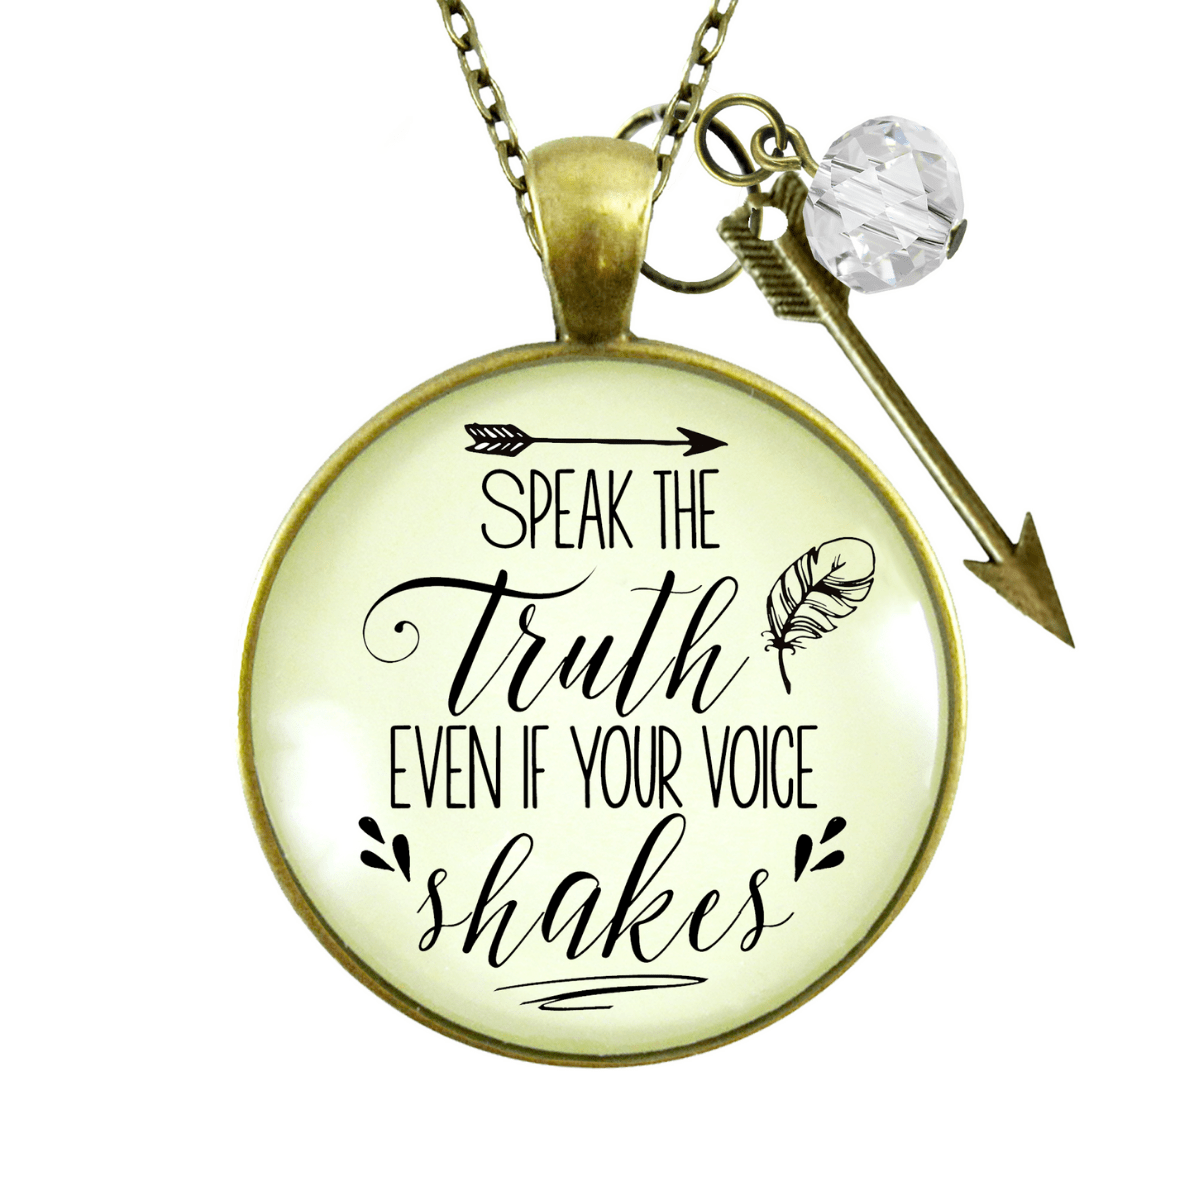 Gutsy Goodness Speak Truth Even Voice Shakes Necklace Brave Jewelry Message - Gutsy Goodness Handmade Jewelry;Speak Truth Even Voice Shakes Necklace Brave Jewelry Message - Gutsy Goodness Handmade Jewelry Gifts